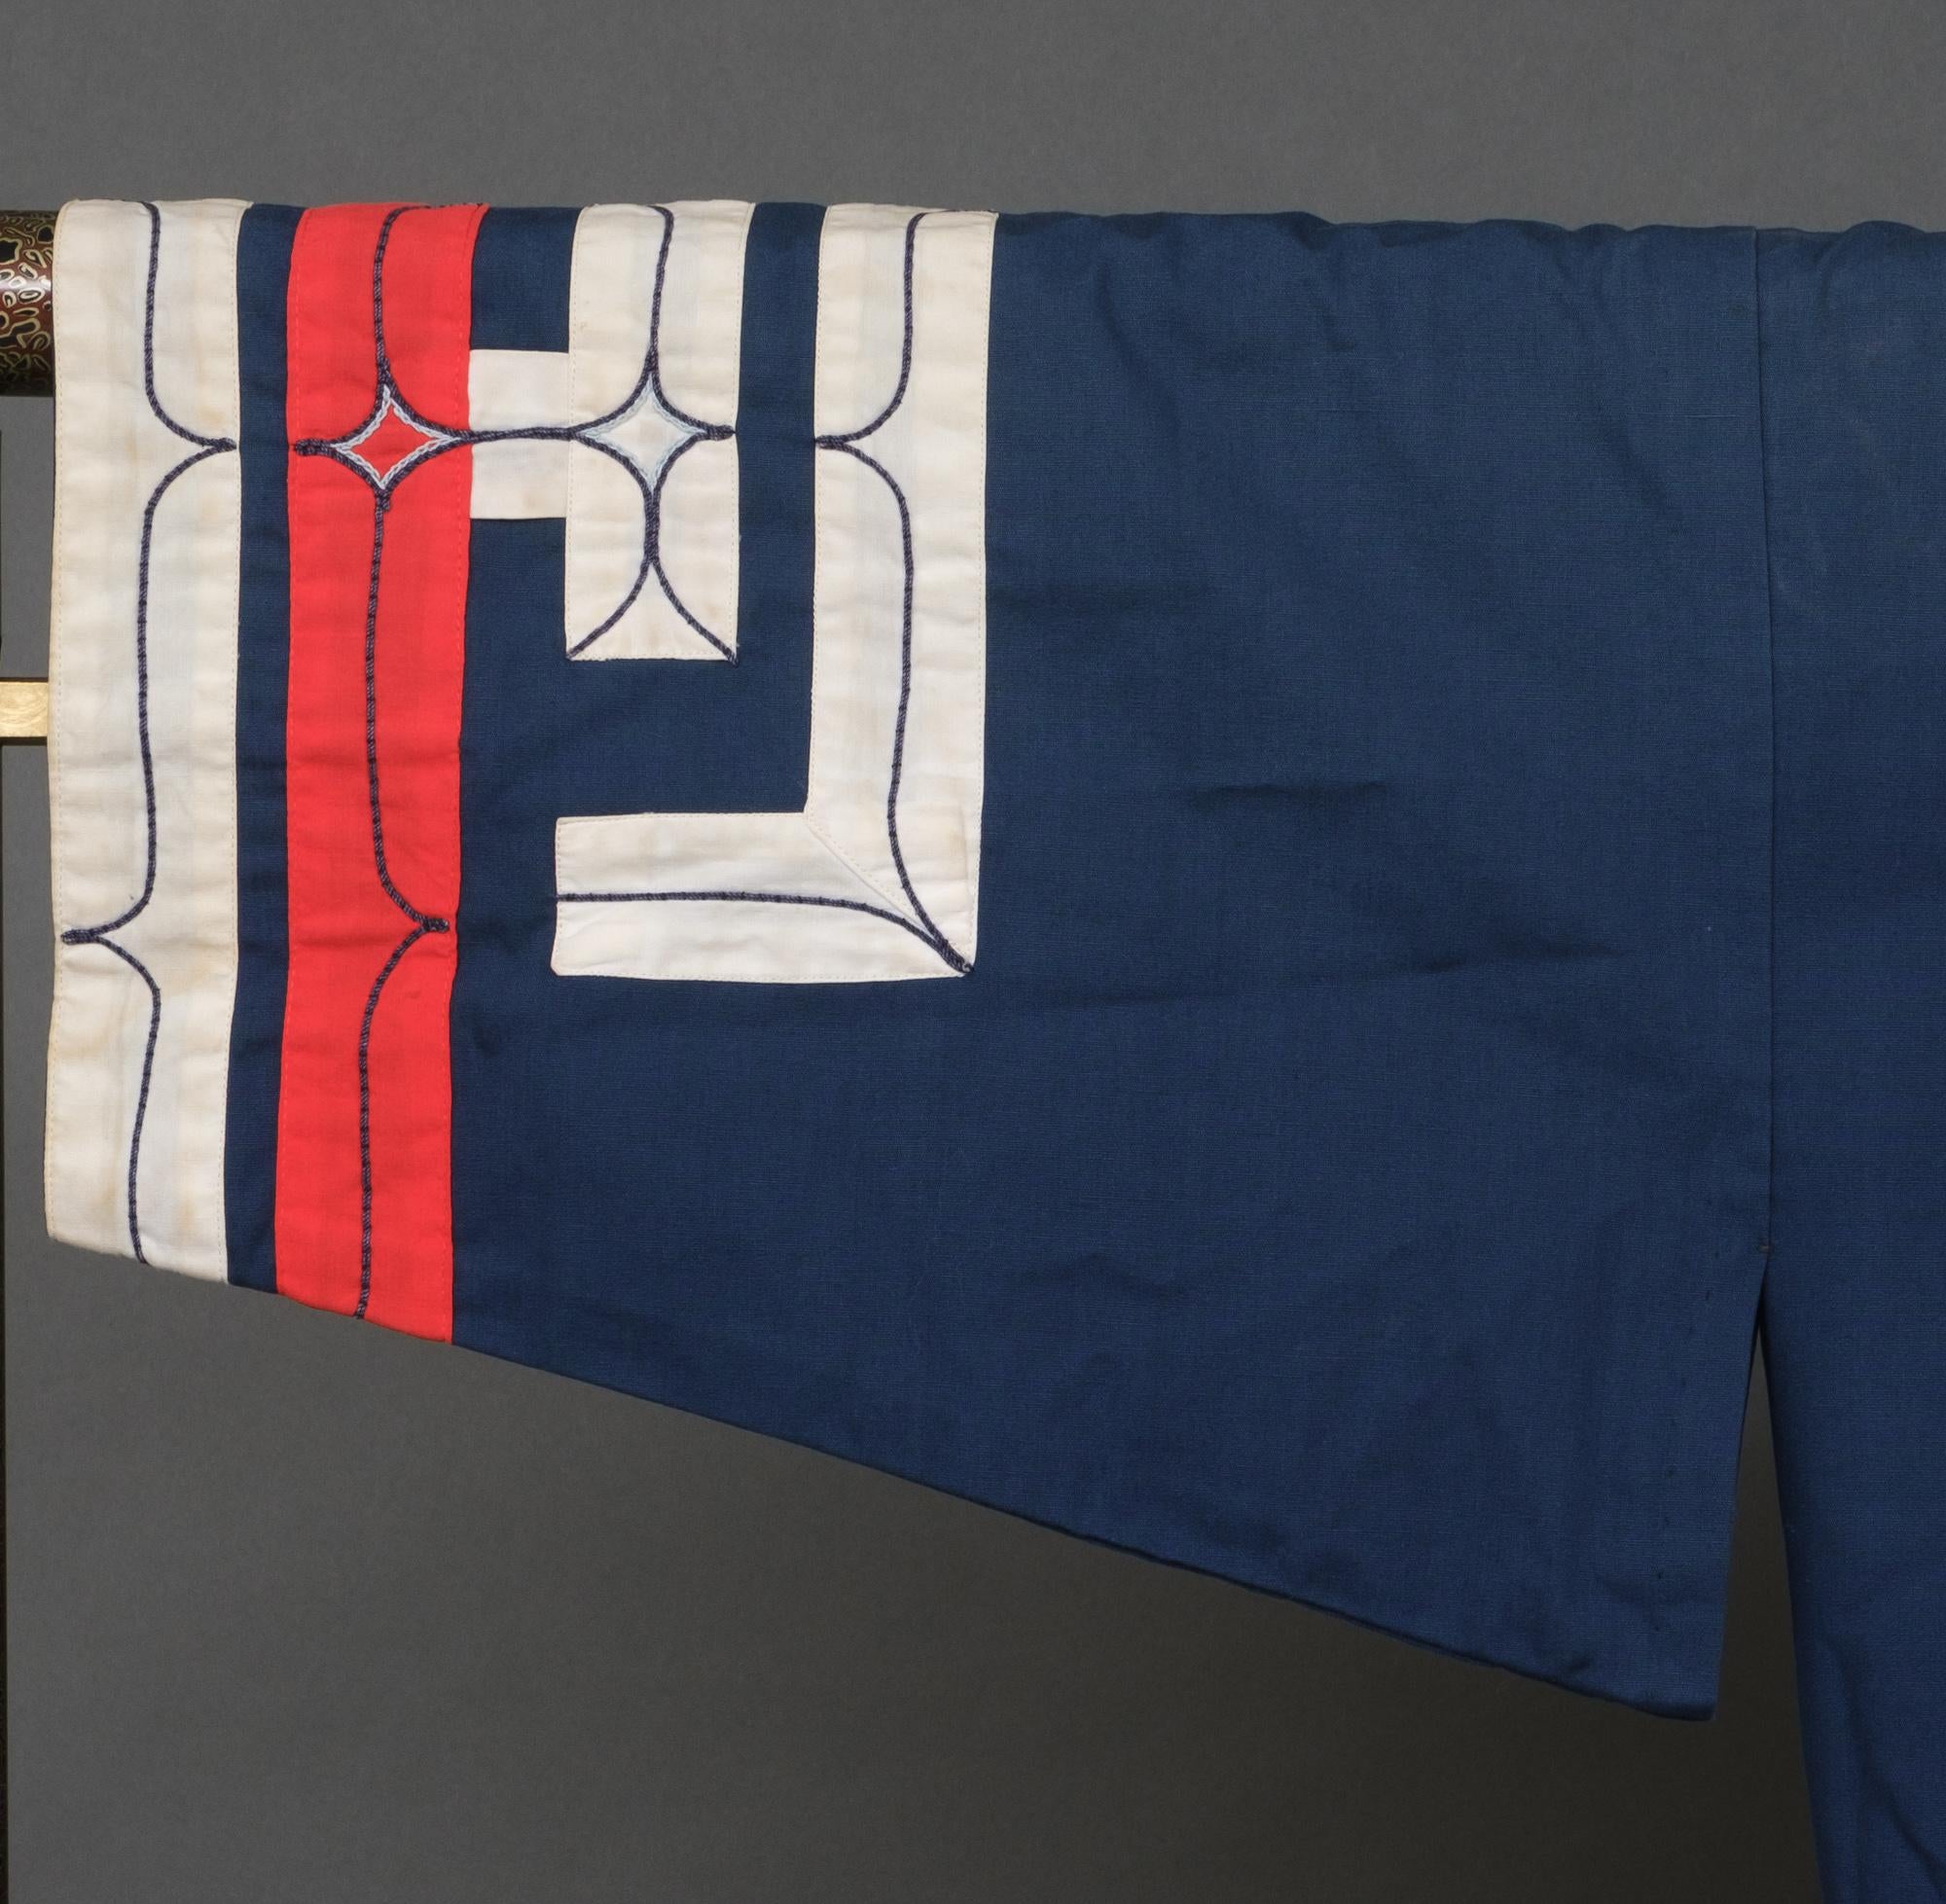 Rare Japanese Ainu navy blue cotton robe featuring wide red and white appliquéd bands along the edges with embroidered geometric shapes.

Acquired from an Ainu education center in the town Shiraoi, Hokkaidô. The last photo shows the lovely visit to